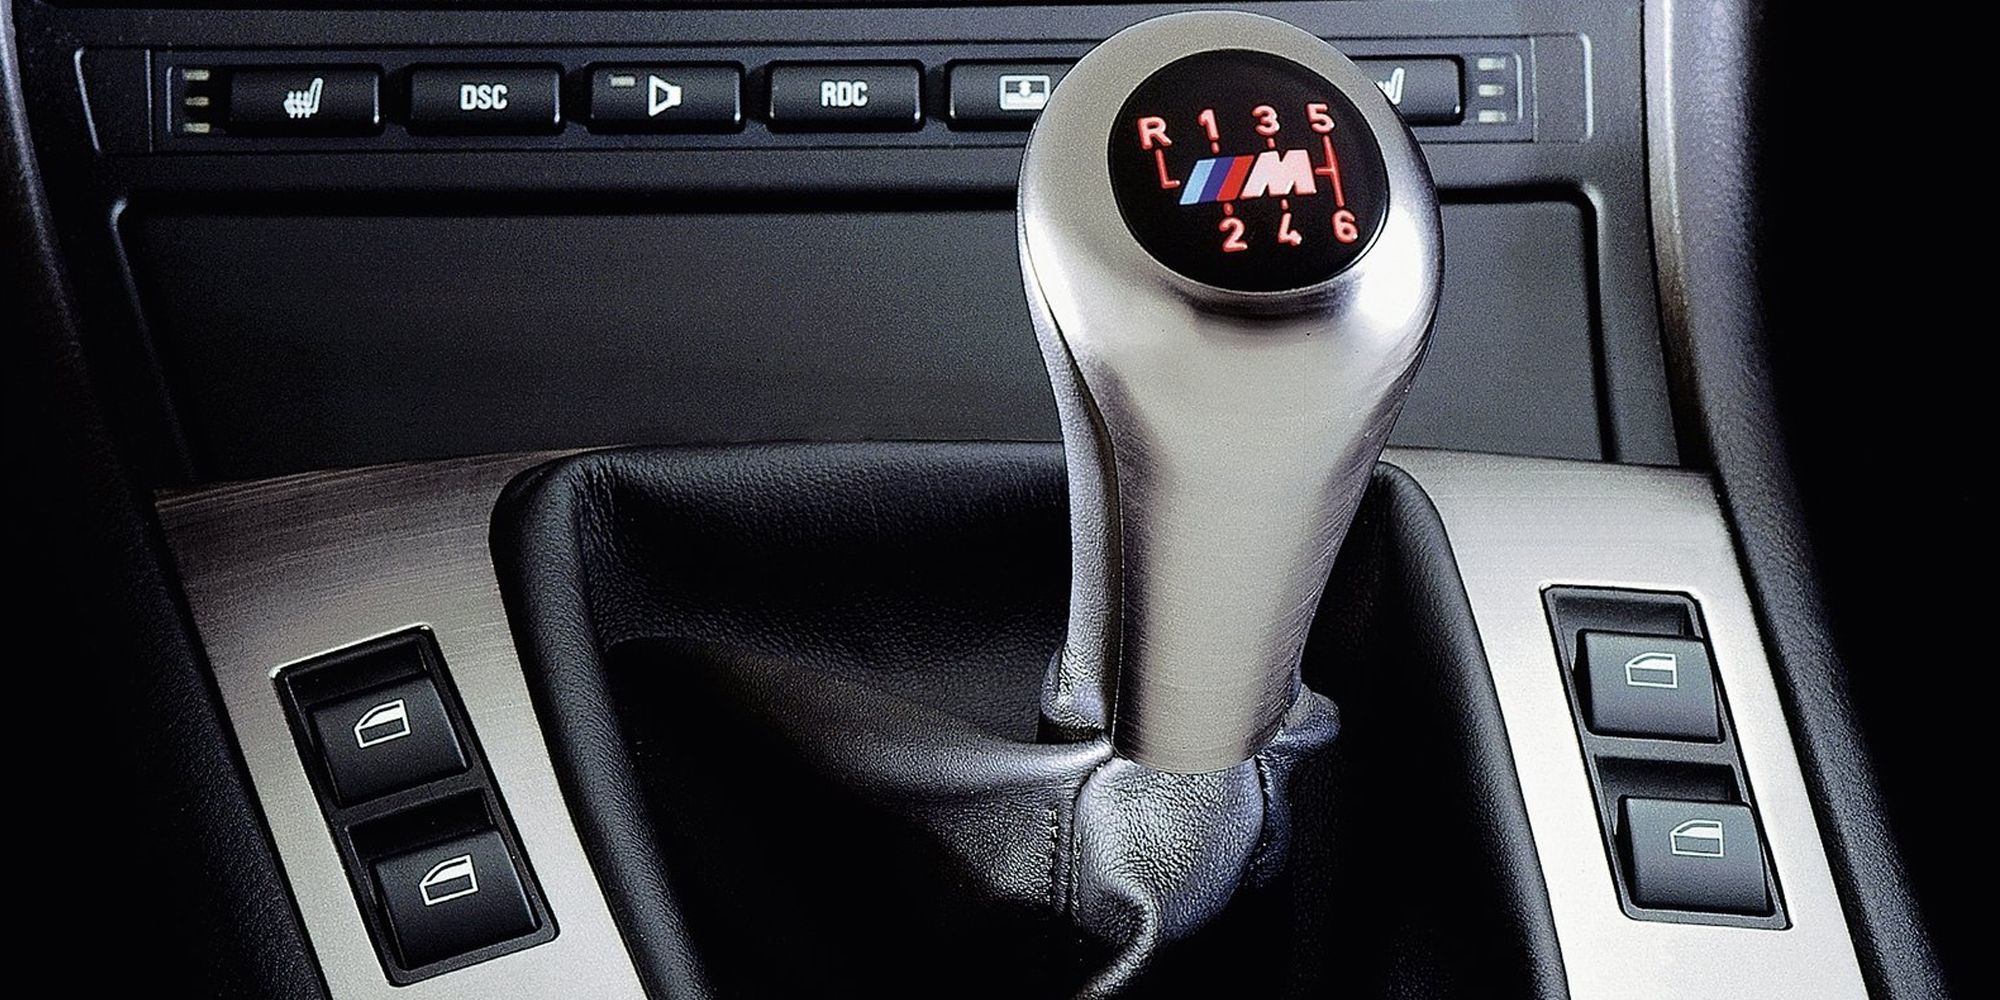 The shifter in the E46 M3